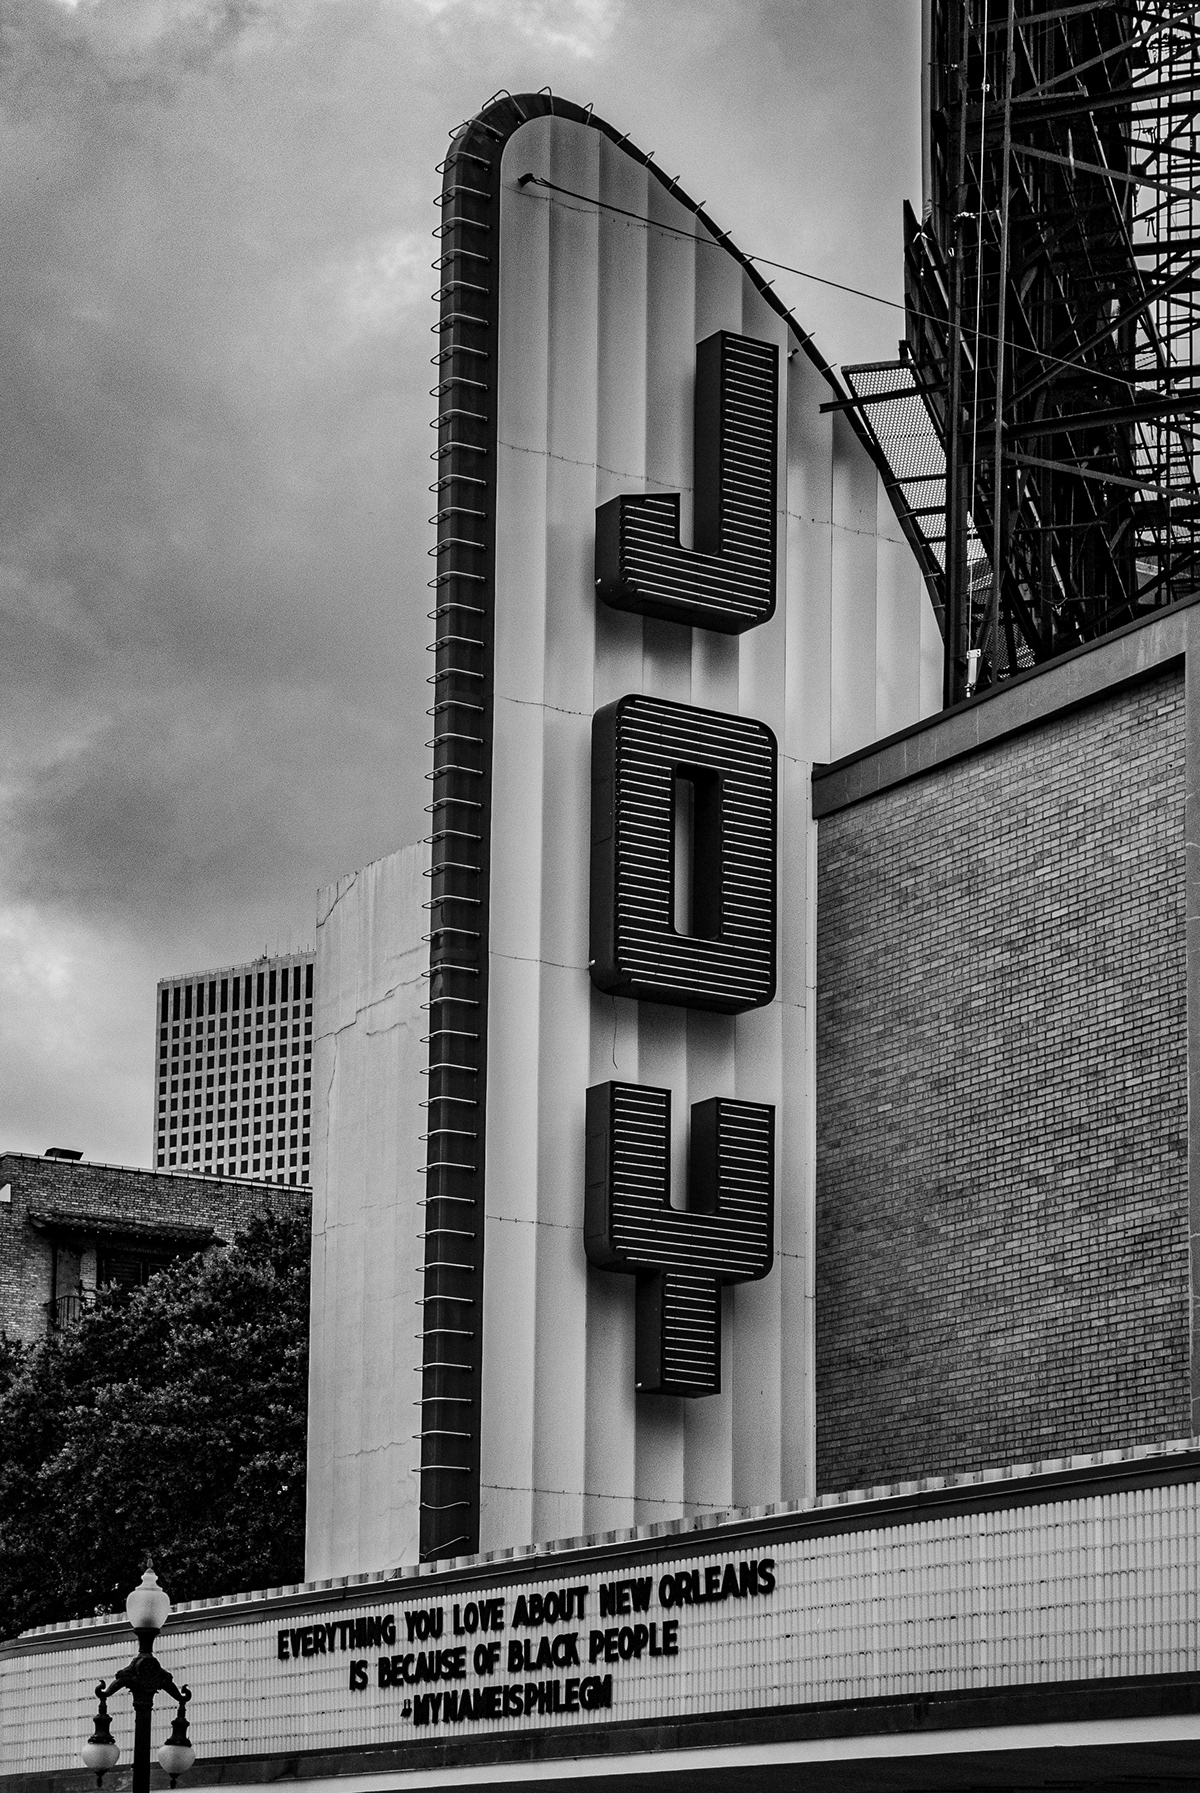 The iconic sign of the historic Joy Theater in New Orleans, Louisiana.